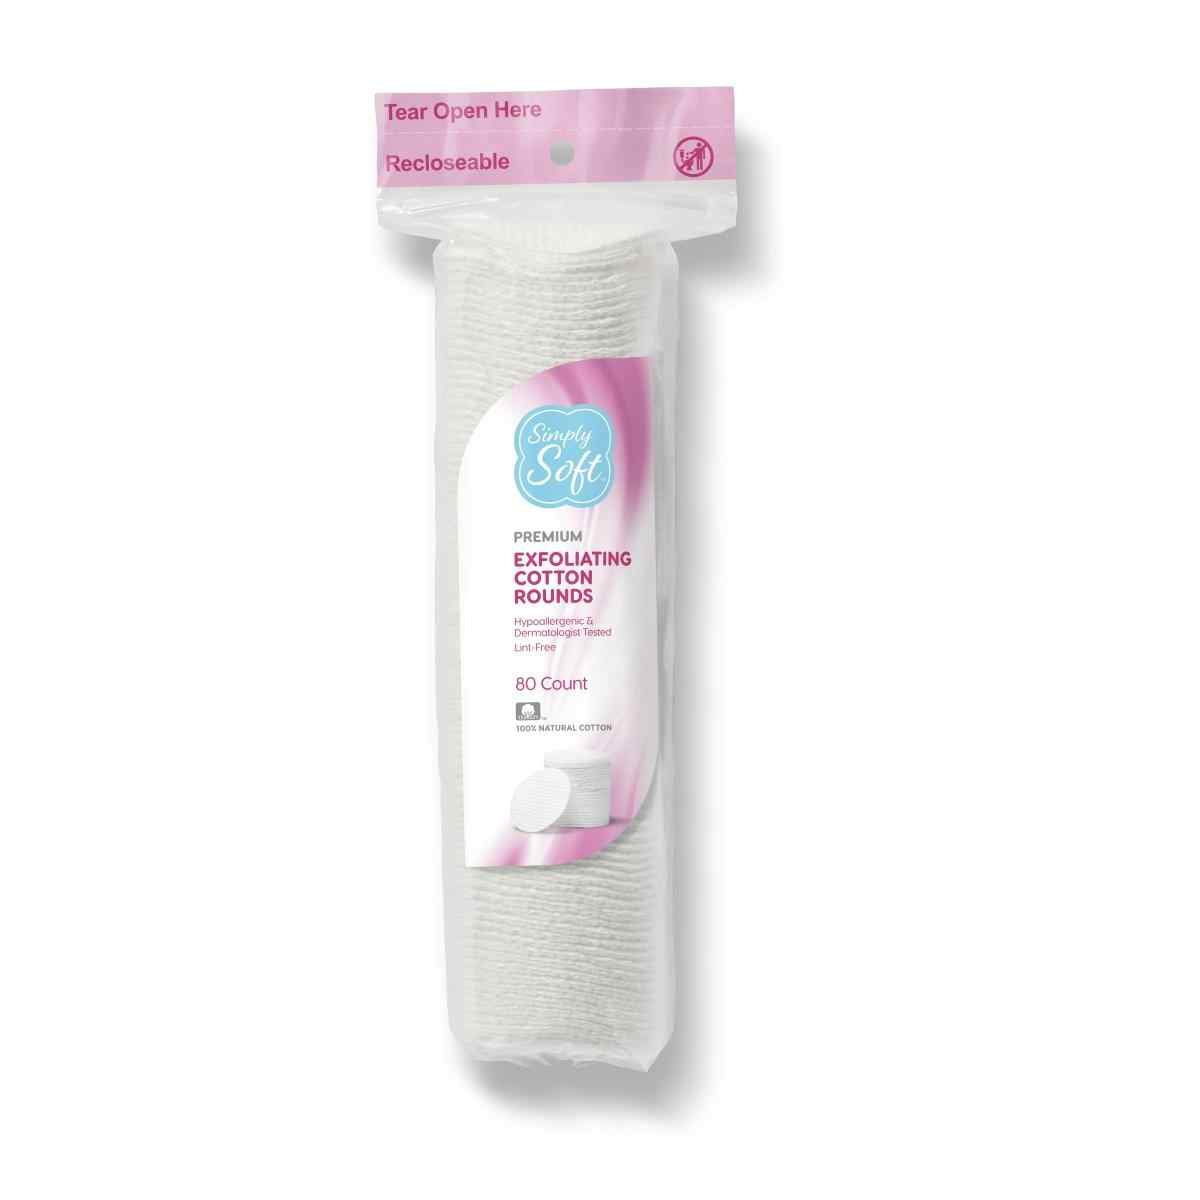 Simply Soft Exfoliating Cotton Rounds